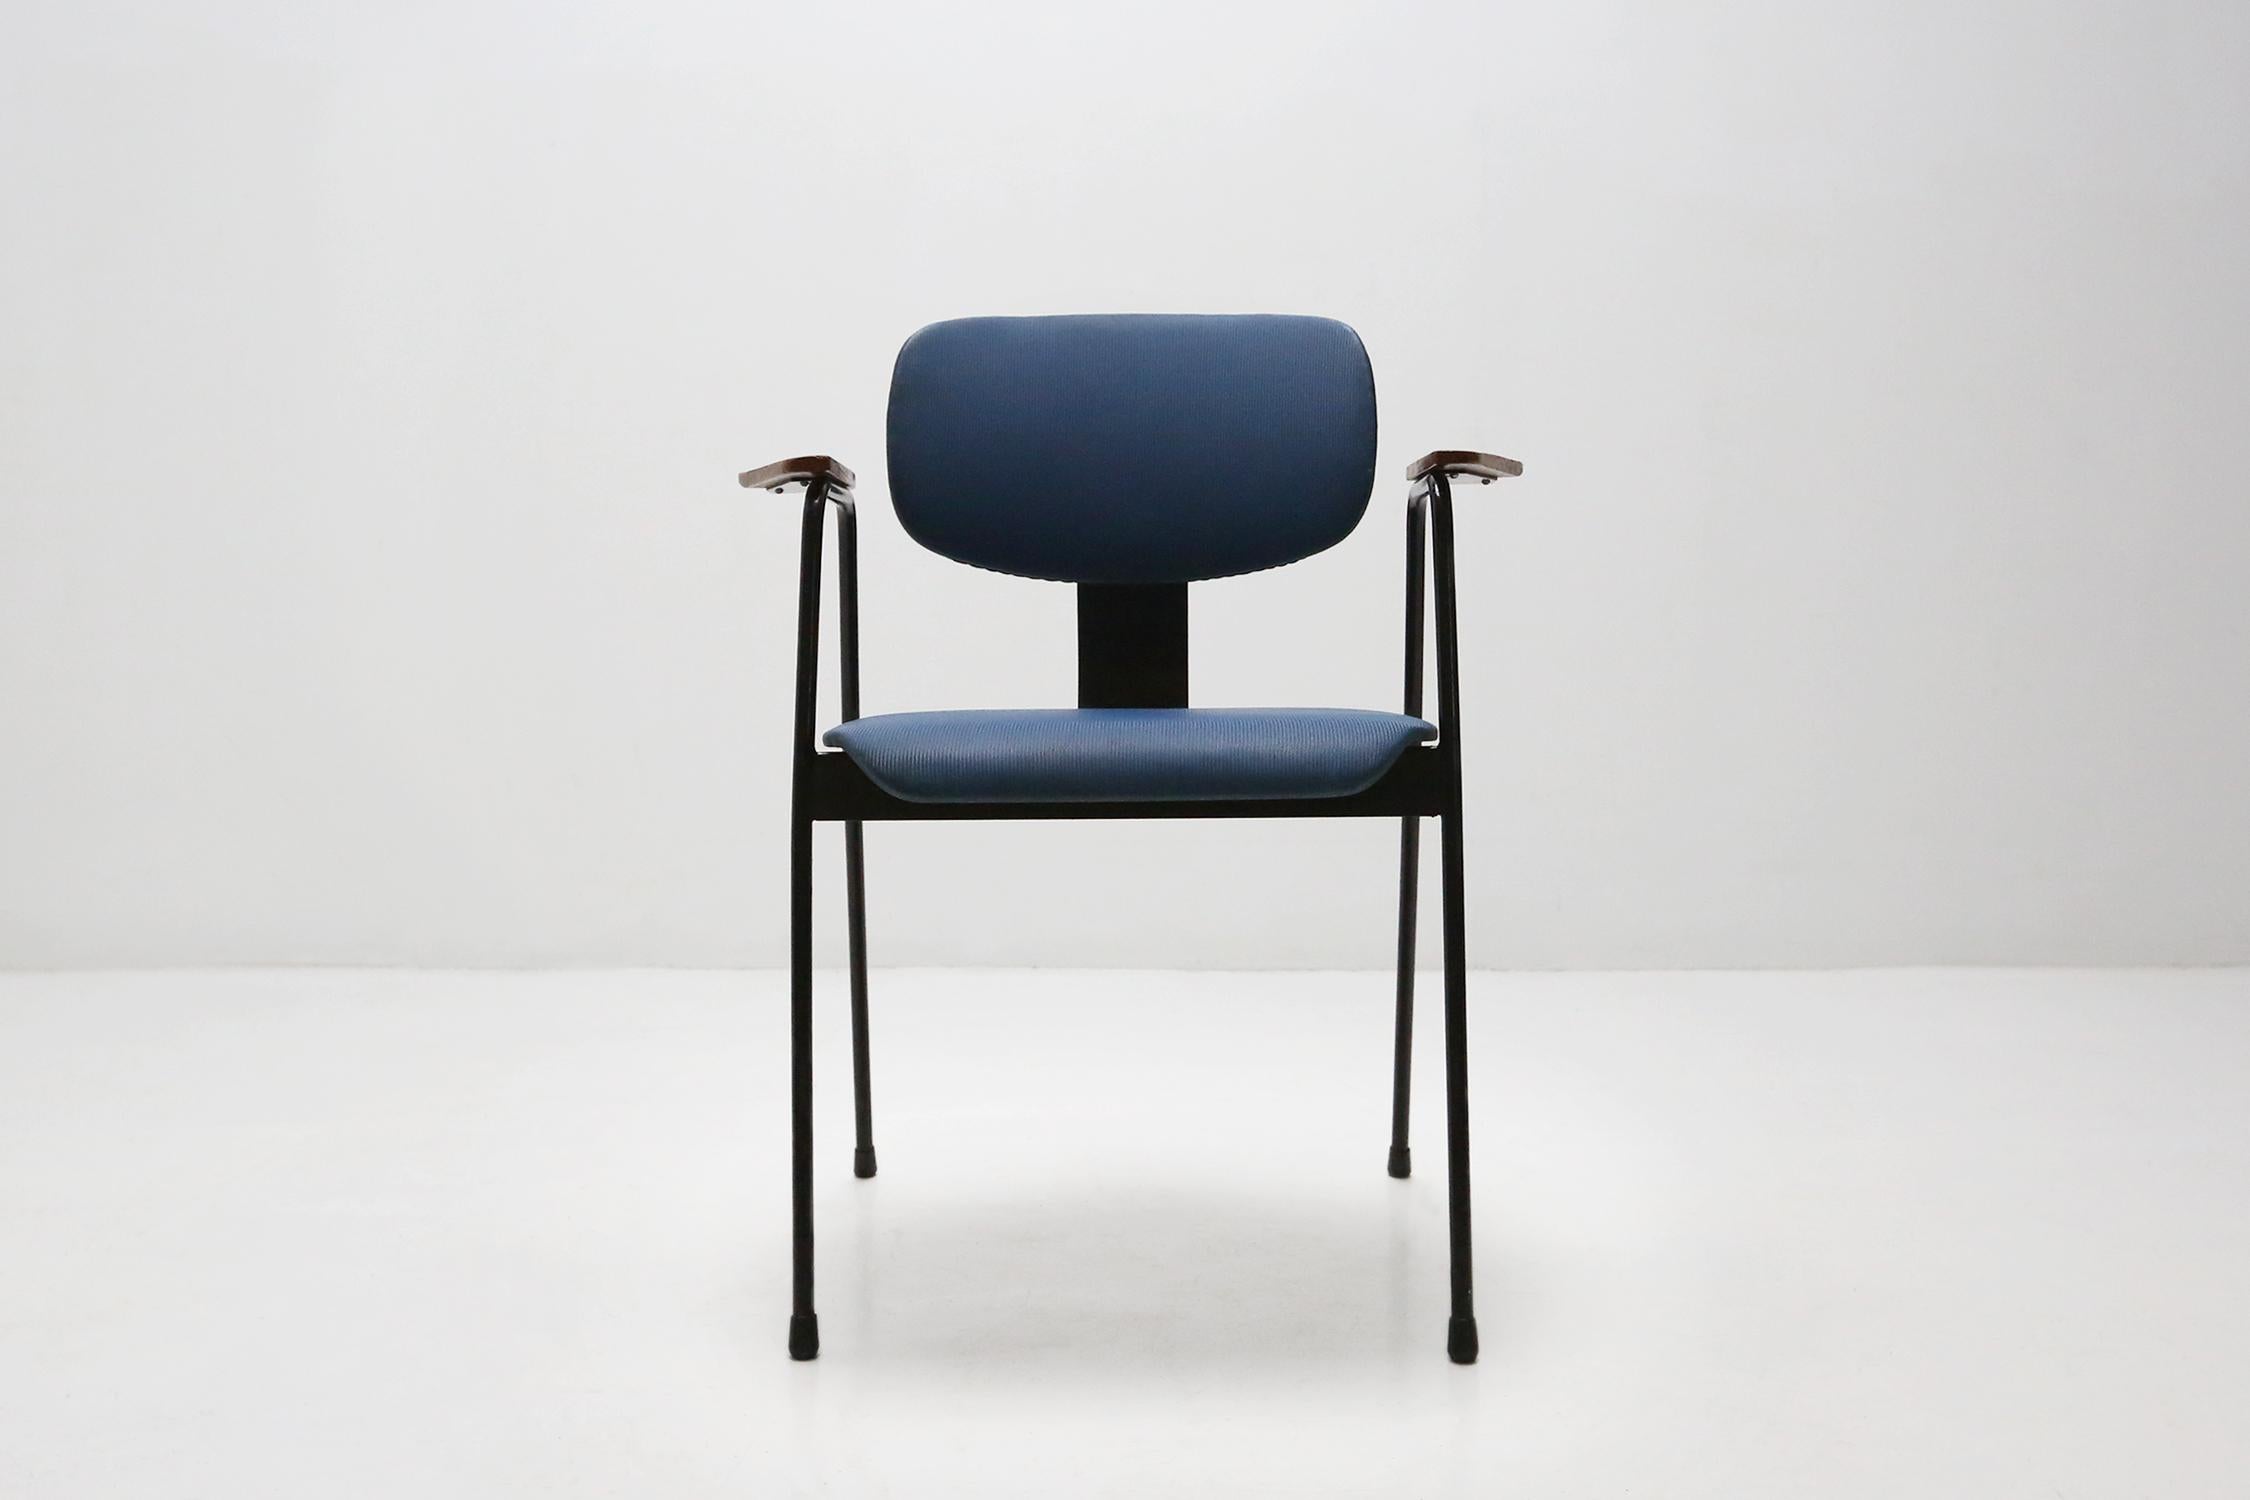 Chair by designer Willy Van Der Meeren for Tubax Ca.1950.
Has a black lacquered metal frame with blue vinyl seat.
The armrests are made of wood. Completely original and in a good vintage condition.

Van Der Meeren is considered one of the most